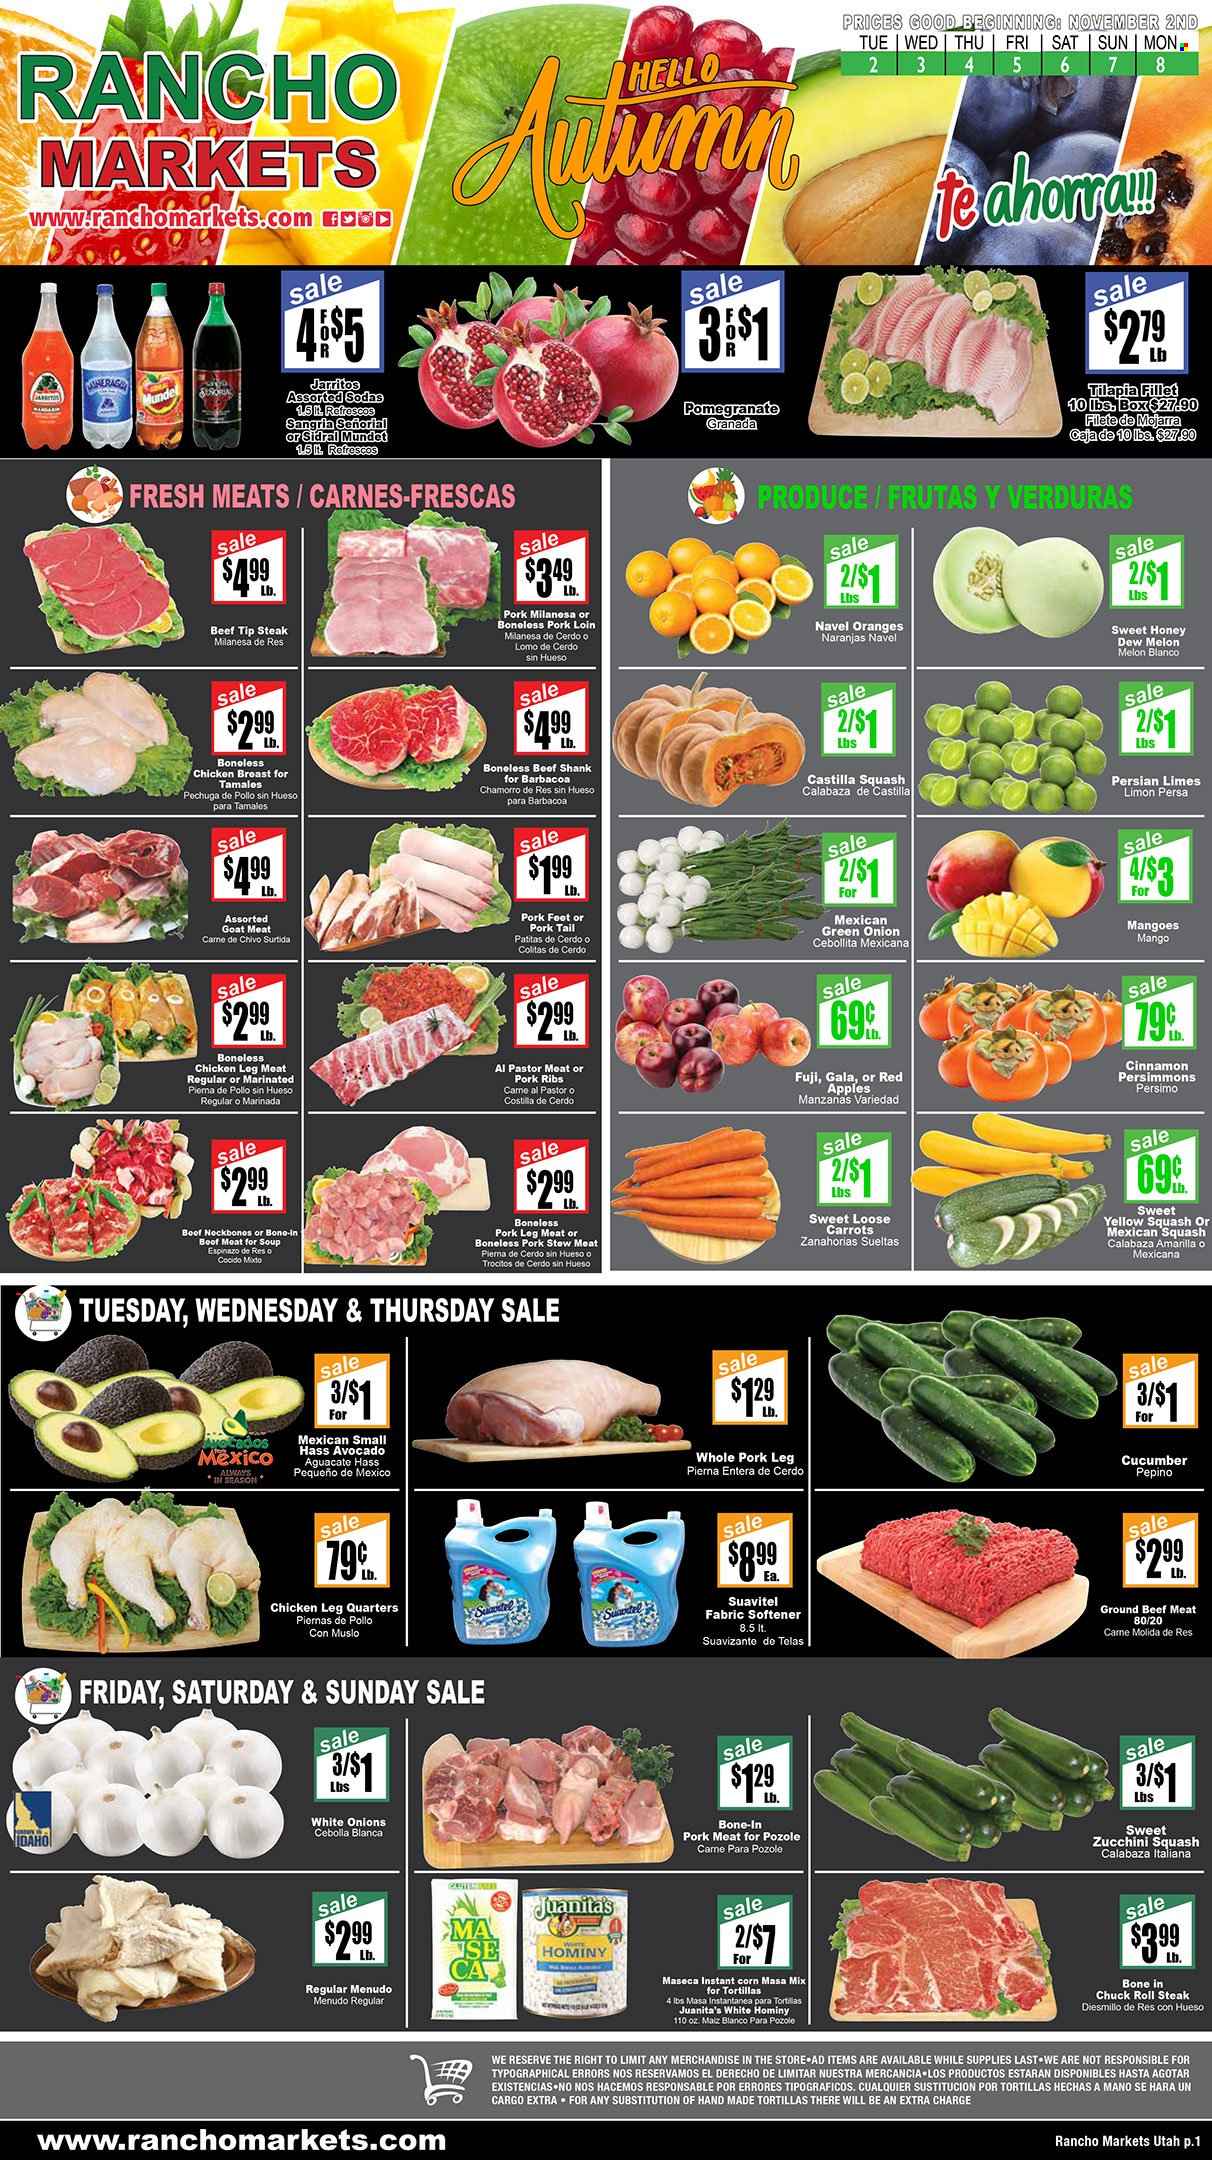 thumbnail - Rancho Markets Flyer - 11/02/2021 - 11/08/2021 - Sales products - stew meat, persimmons, tortillas, carrots, corn, zucchini, green onion, mexican squash, yellow squash, castilla squash, apples, avocado, Gala, limes, mango, oranges, tilapia, soup, cinnamon, chicken breasts, chicken legs, beef meat, beef shank, ground beef, steak, chuck steak, pork loin, pork meat, pork ribs, pork leg, goat meat, fabric softener, melons, pomegranate, navel oranges. Page 1.